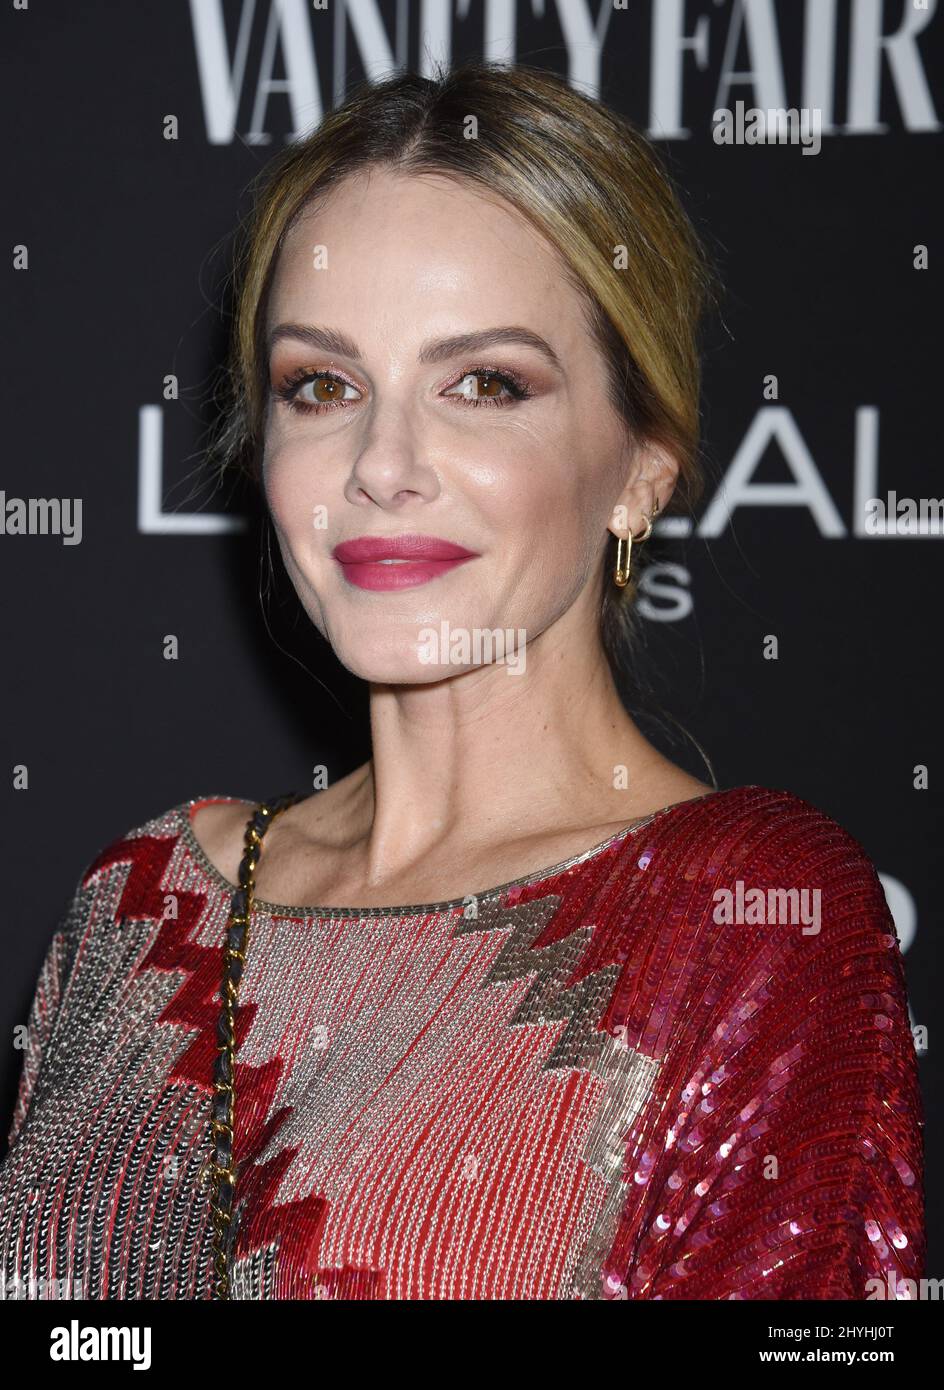 Monet Mazur at the Vanity Fair and L'Oreal Paris Celebrate New Hollywood Party held at Ysabel on February 19, 2019 in West Hollywood Stock Photo